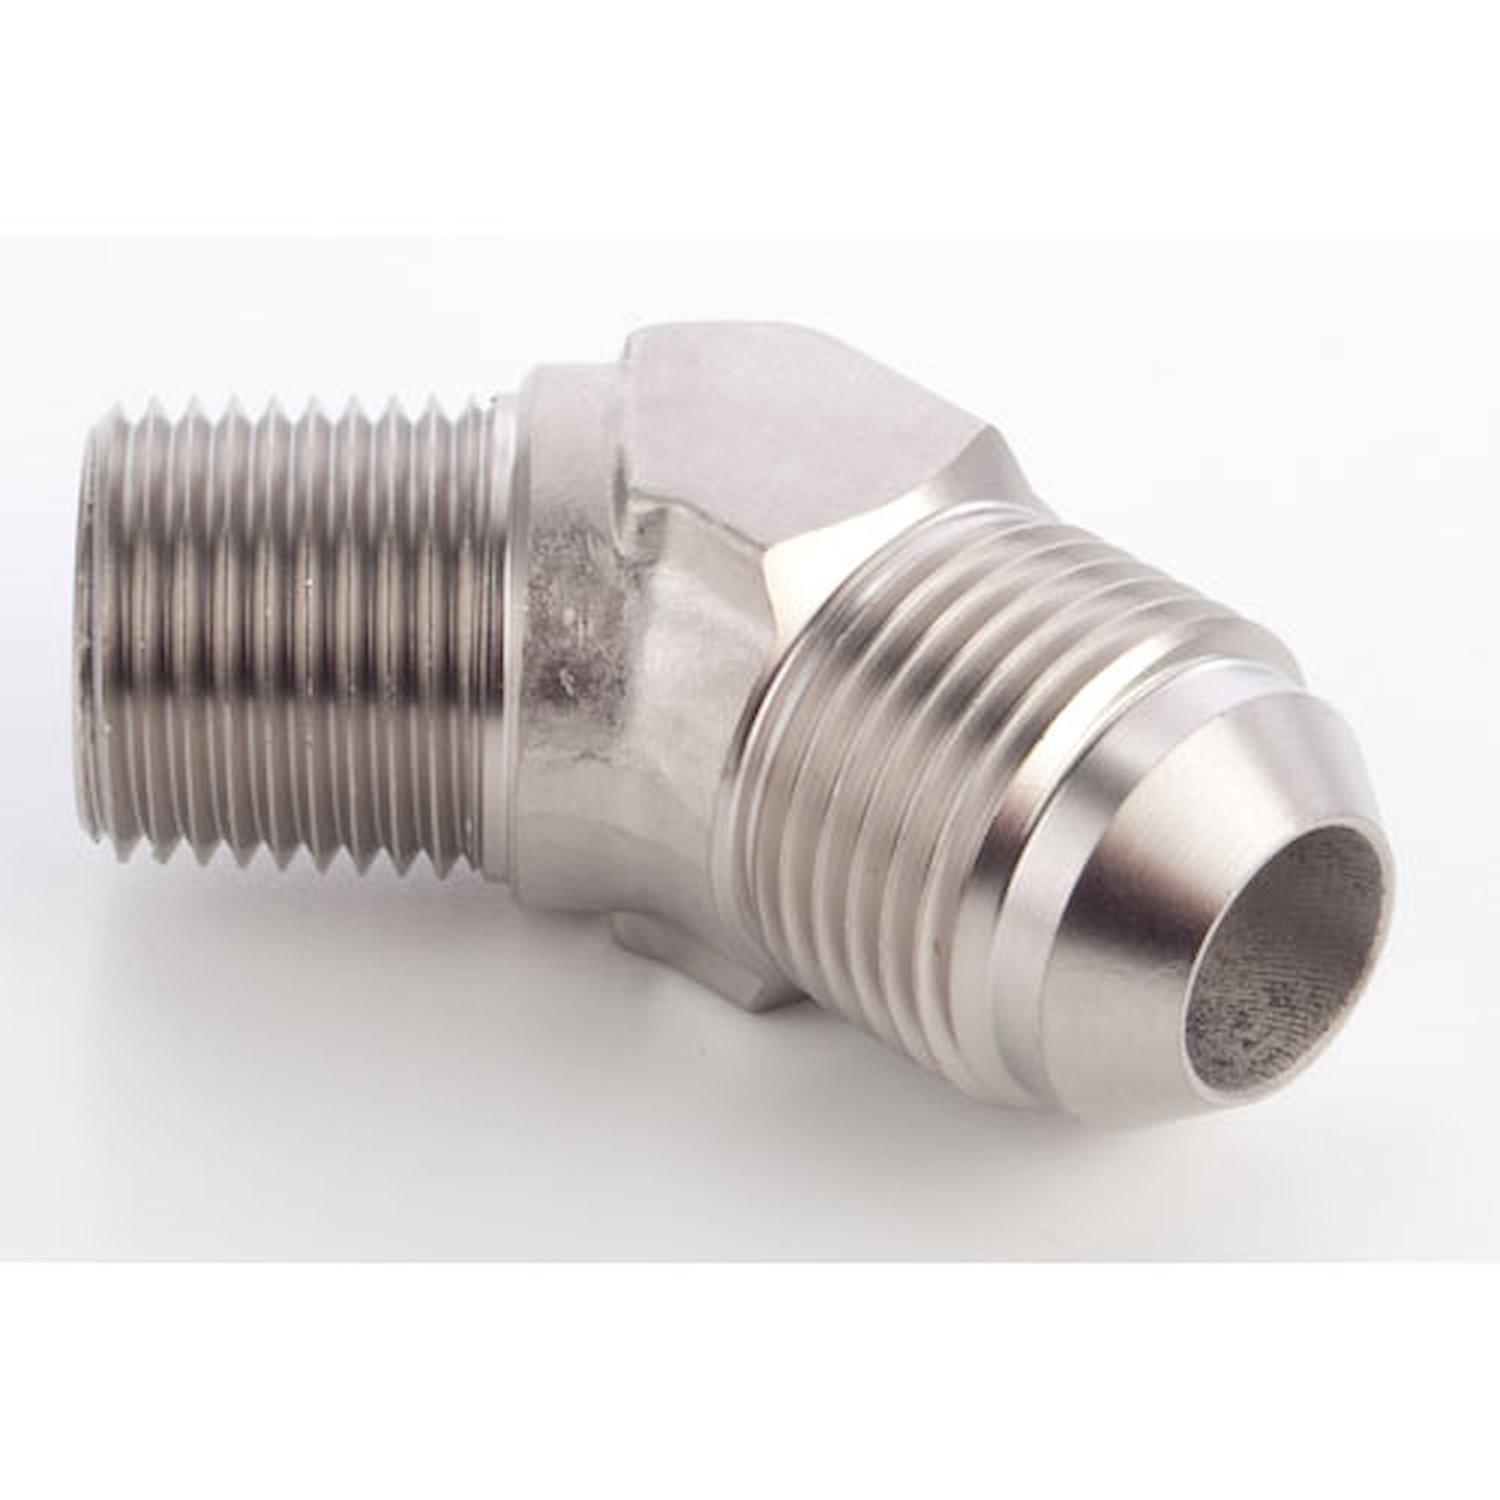 Nickel 45 degree Flare Fitting [3/8 in. NPT